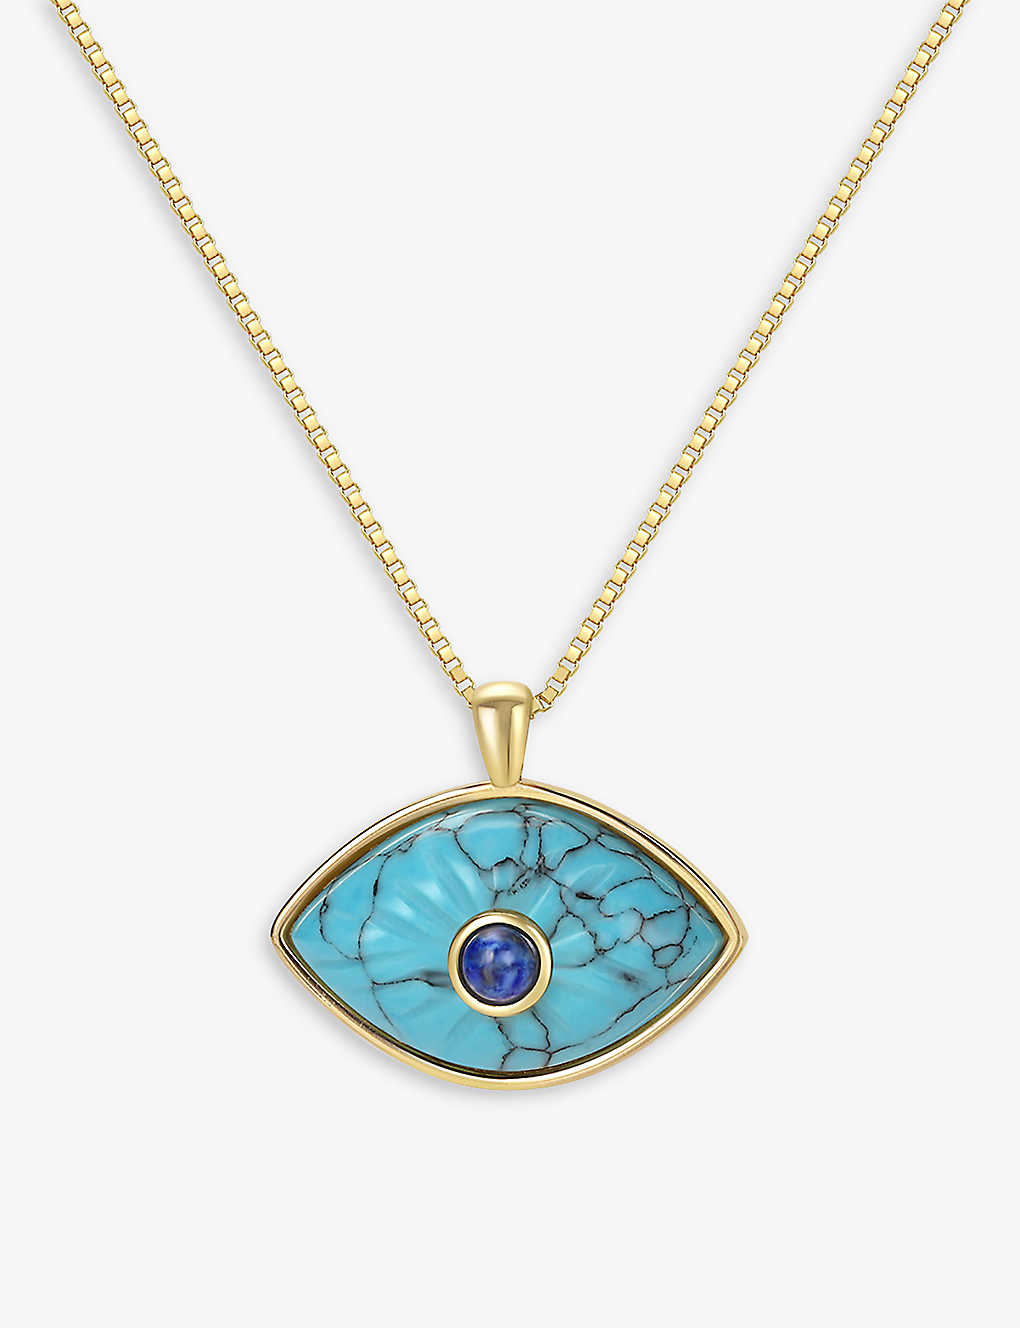 Celeste Starre Eyes On You Recycled 18ct Yellow Gold-plated Brass, Turquoise And Lapis Pendant Necklace